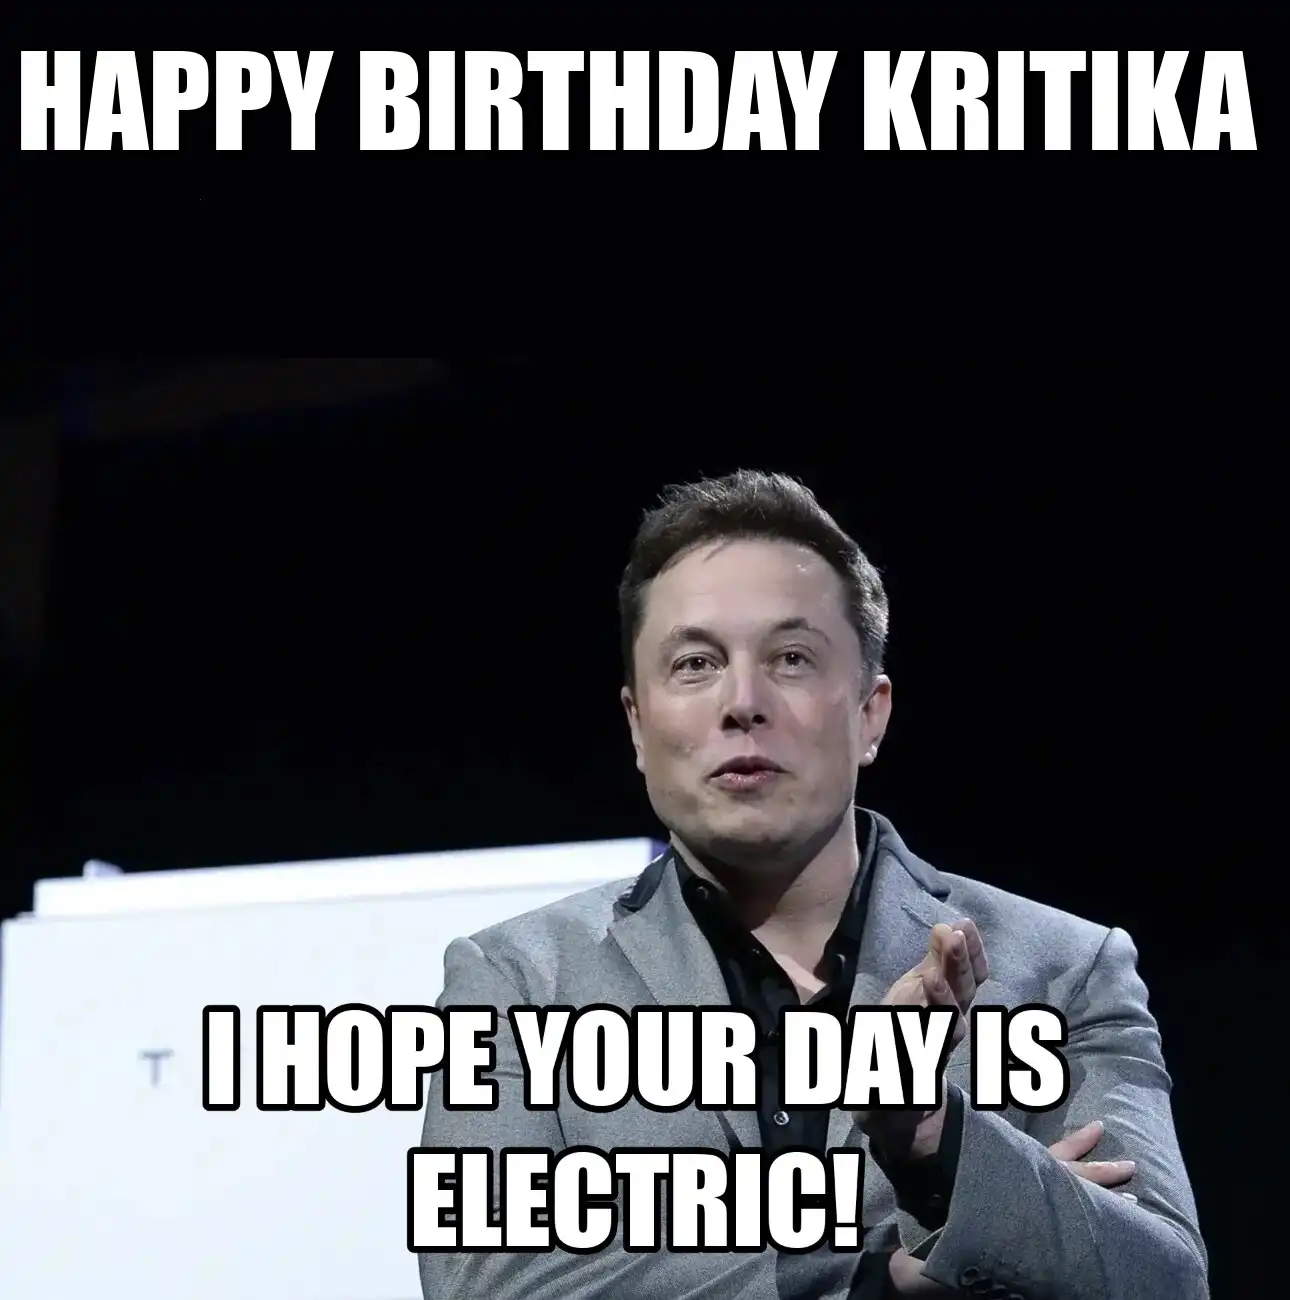 Happy Birthday Kritika I Hope Your Day Is Electric Meme